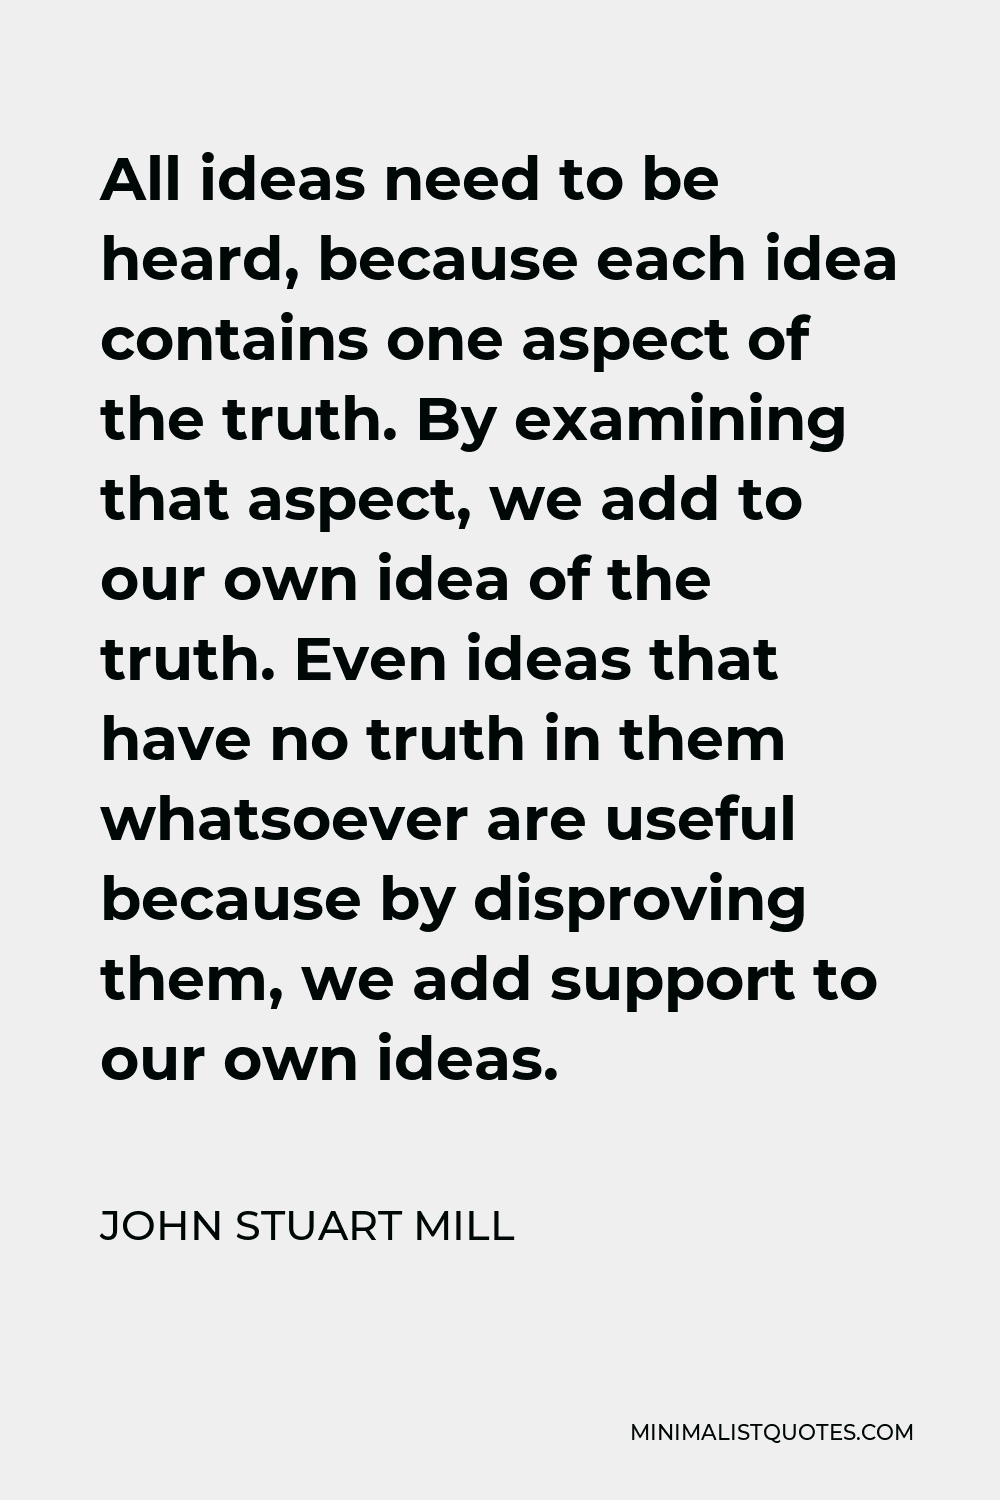 John Stuart Mill Quote - All ideas need to be heard, because each idea contains one aspect of the truth. By examining that aspect, we add to our own idea of the truth. Even ideas that have no truth in them whatsoever are useful because by disproving them, we add support to our own ideas.